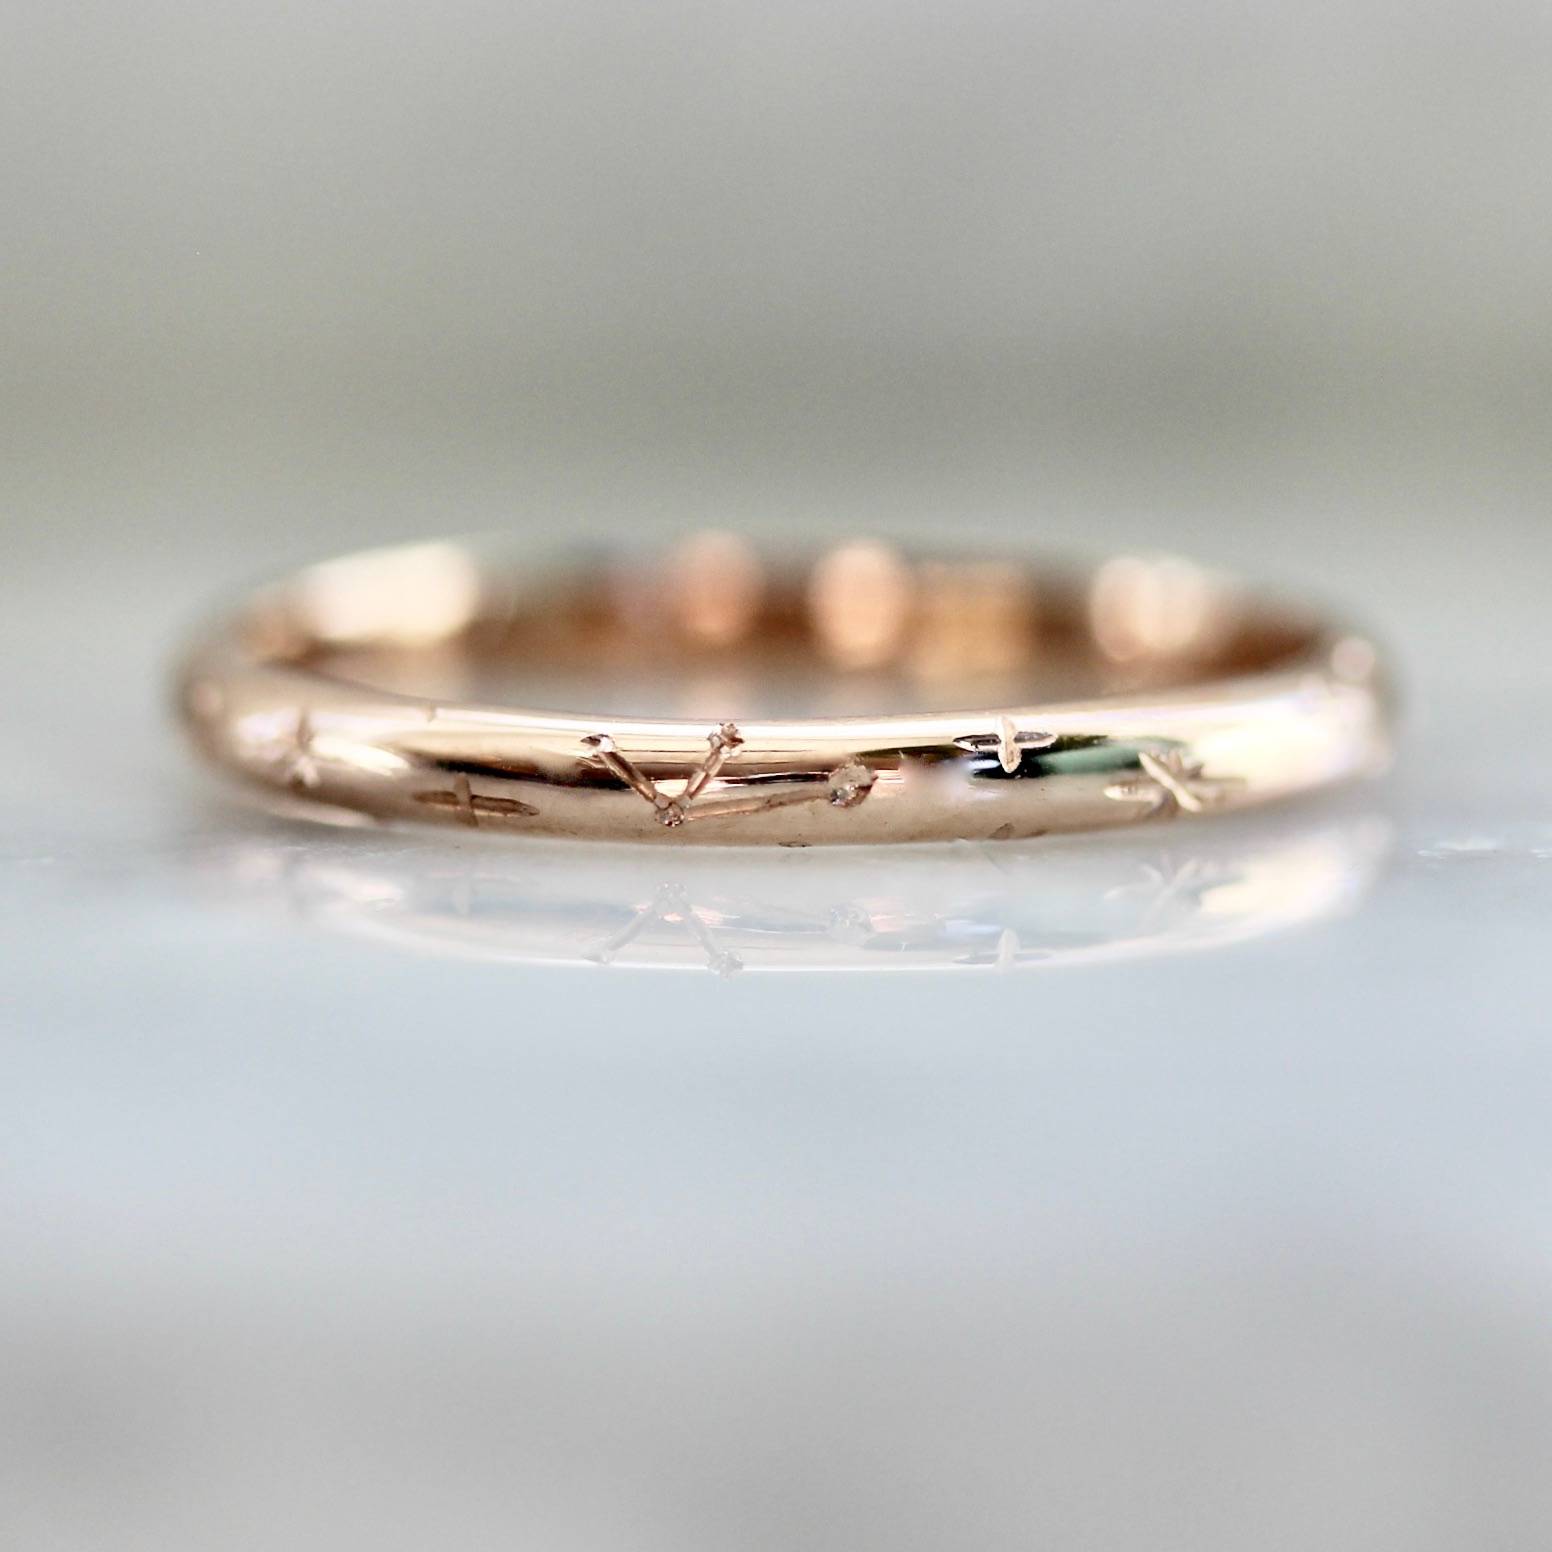 equinox-moon-and-constellation-engraved-gold-band